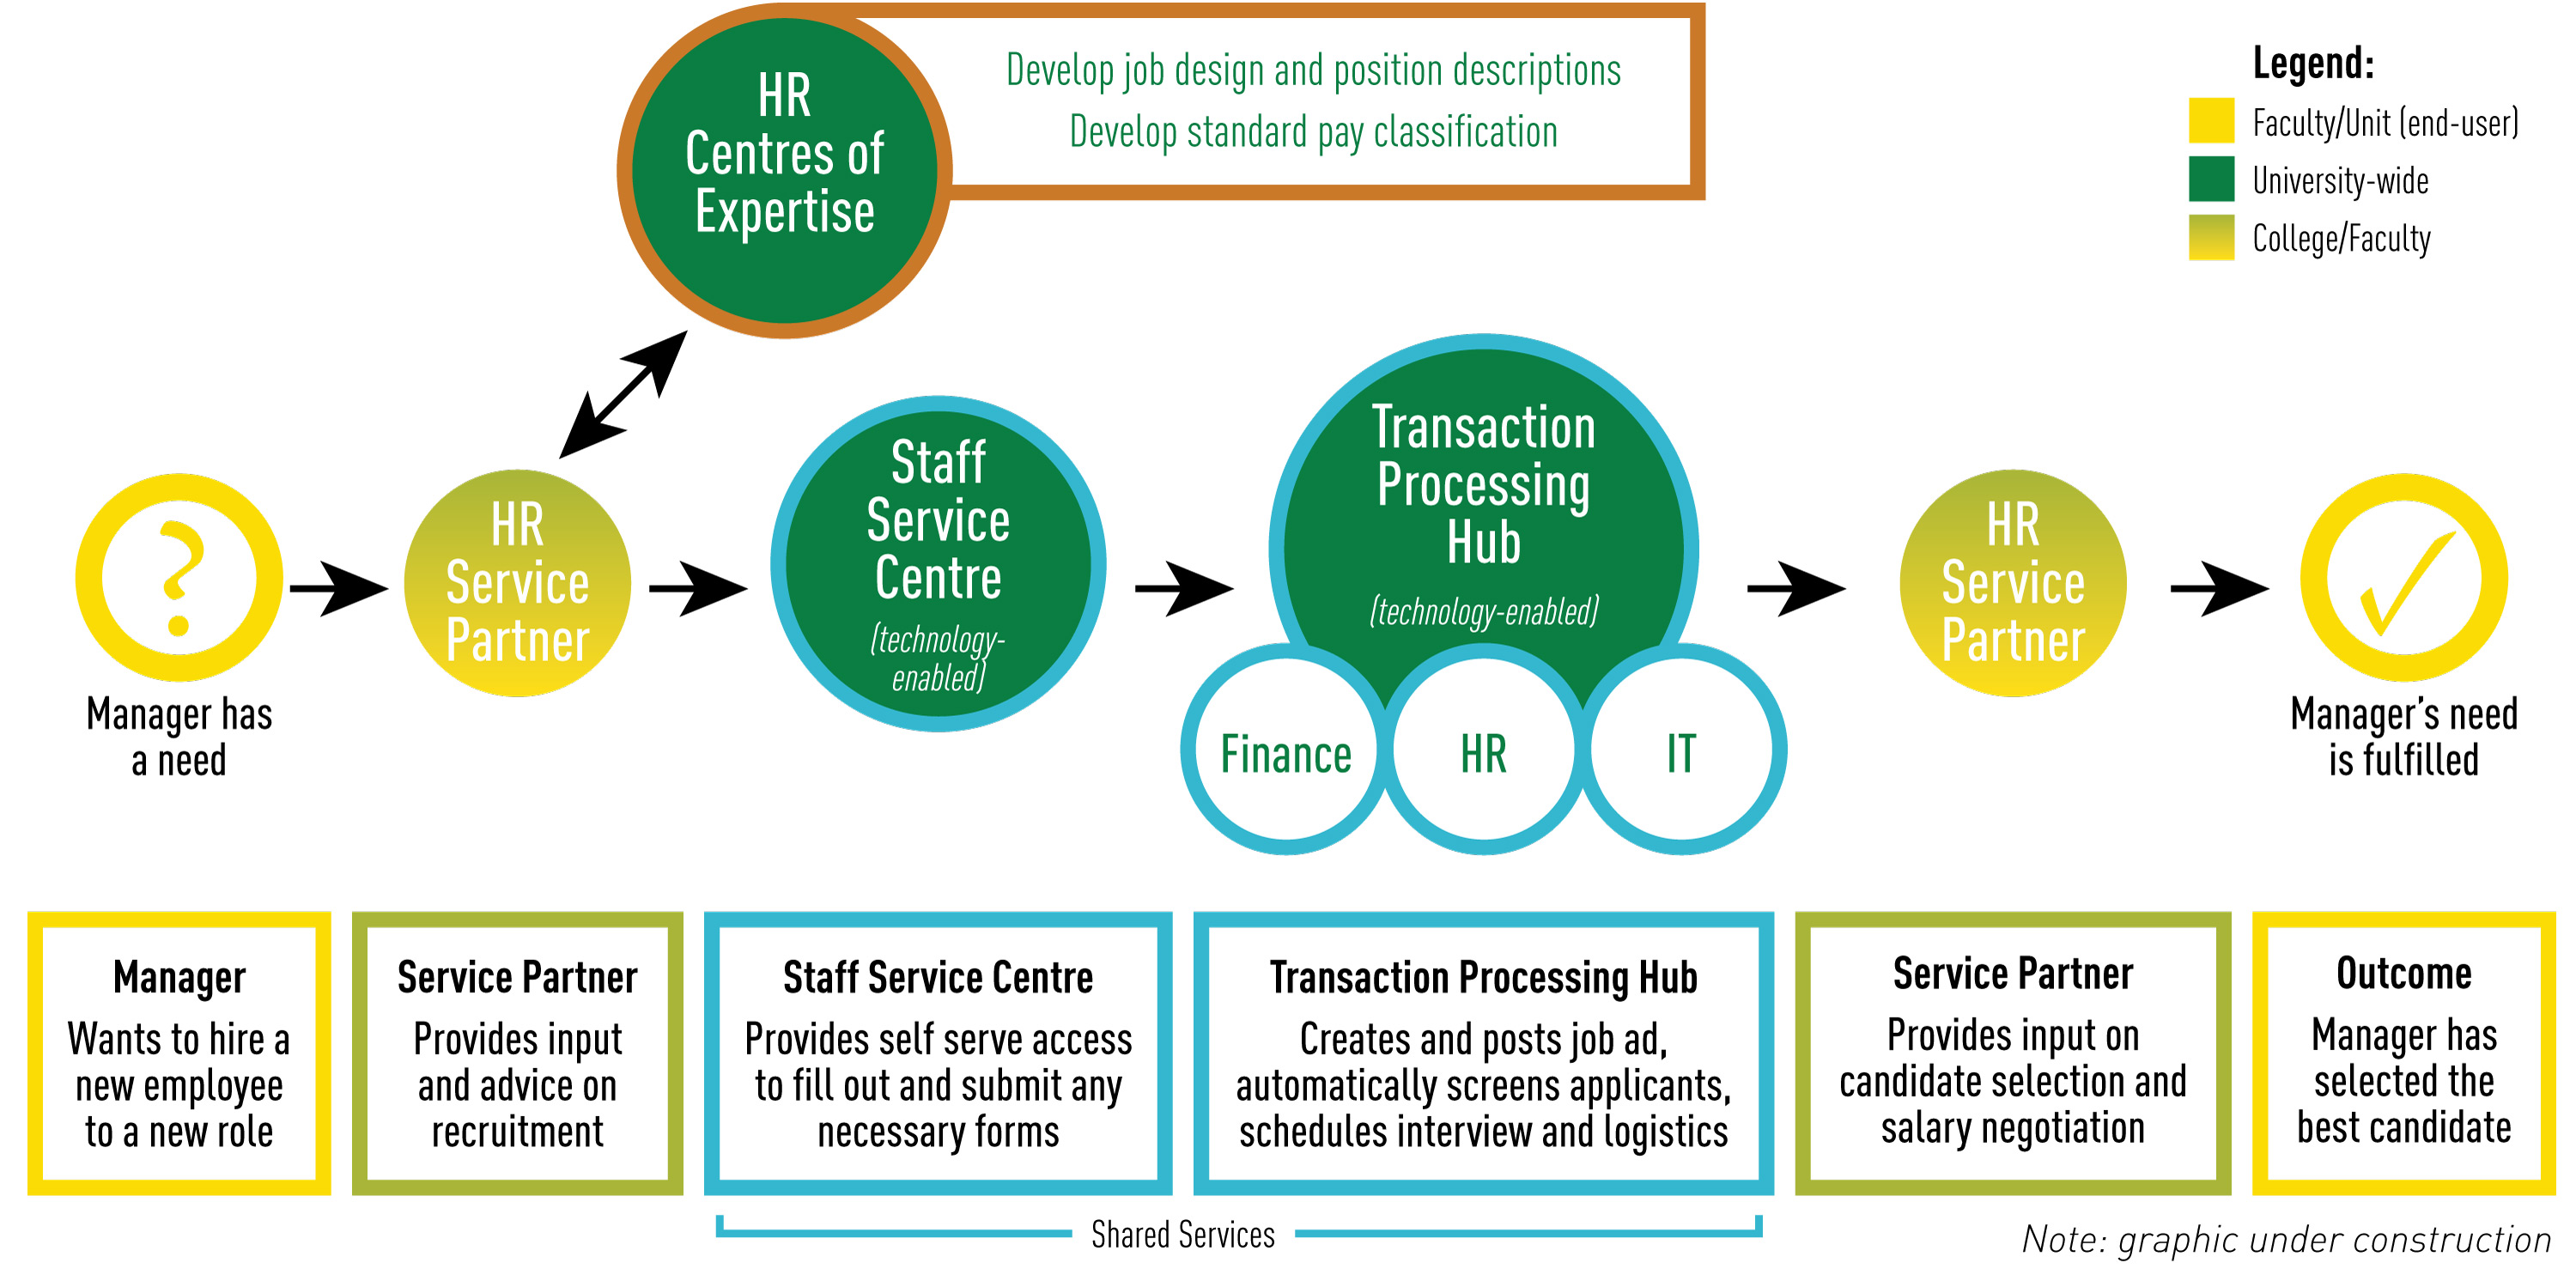 Example of a new hire process in the new operating model